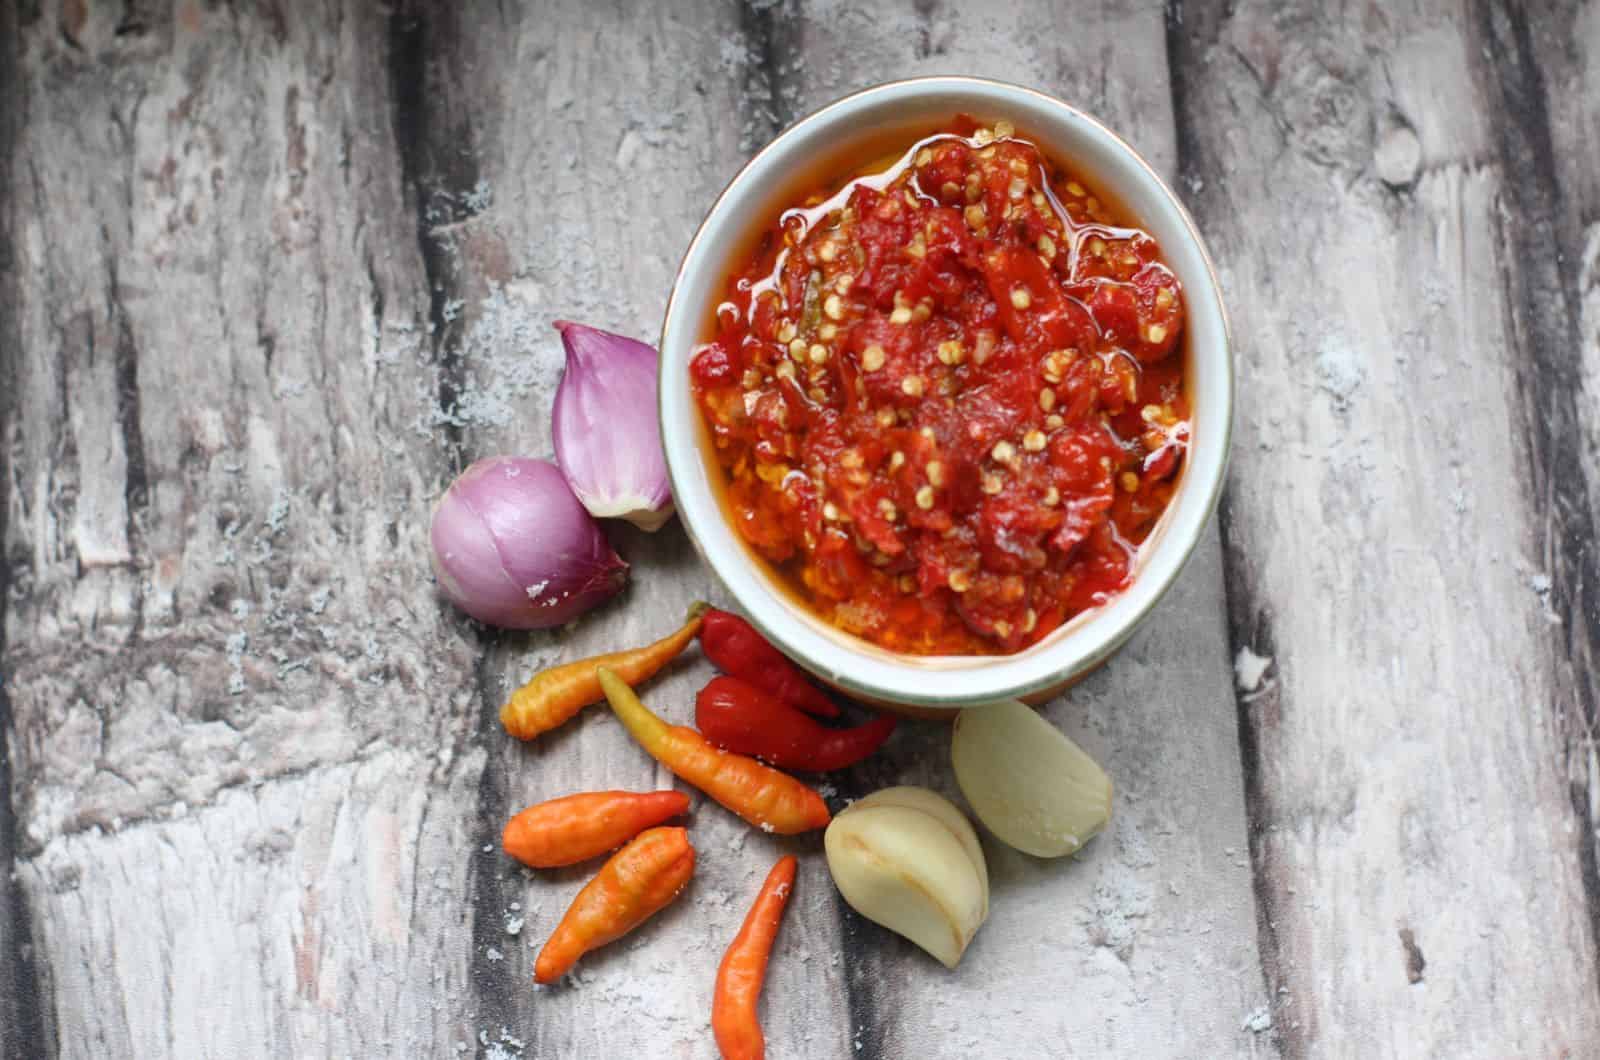 Chili-garlic paste in a bowl on the table